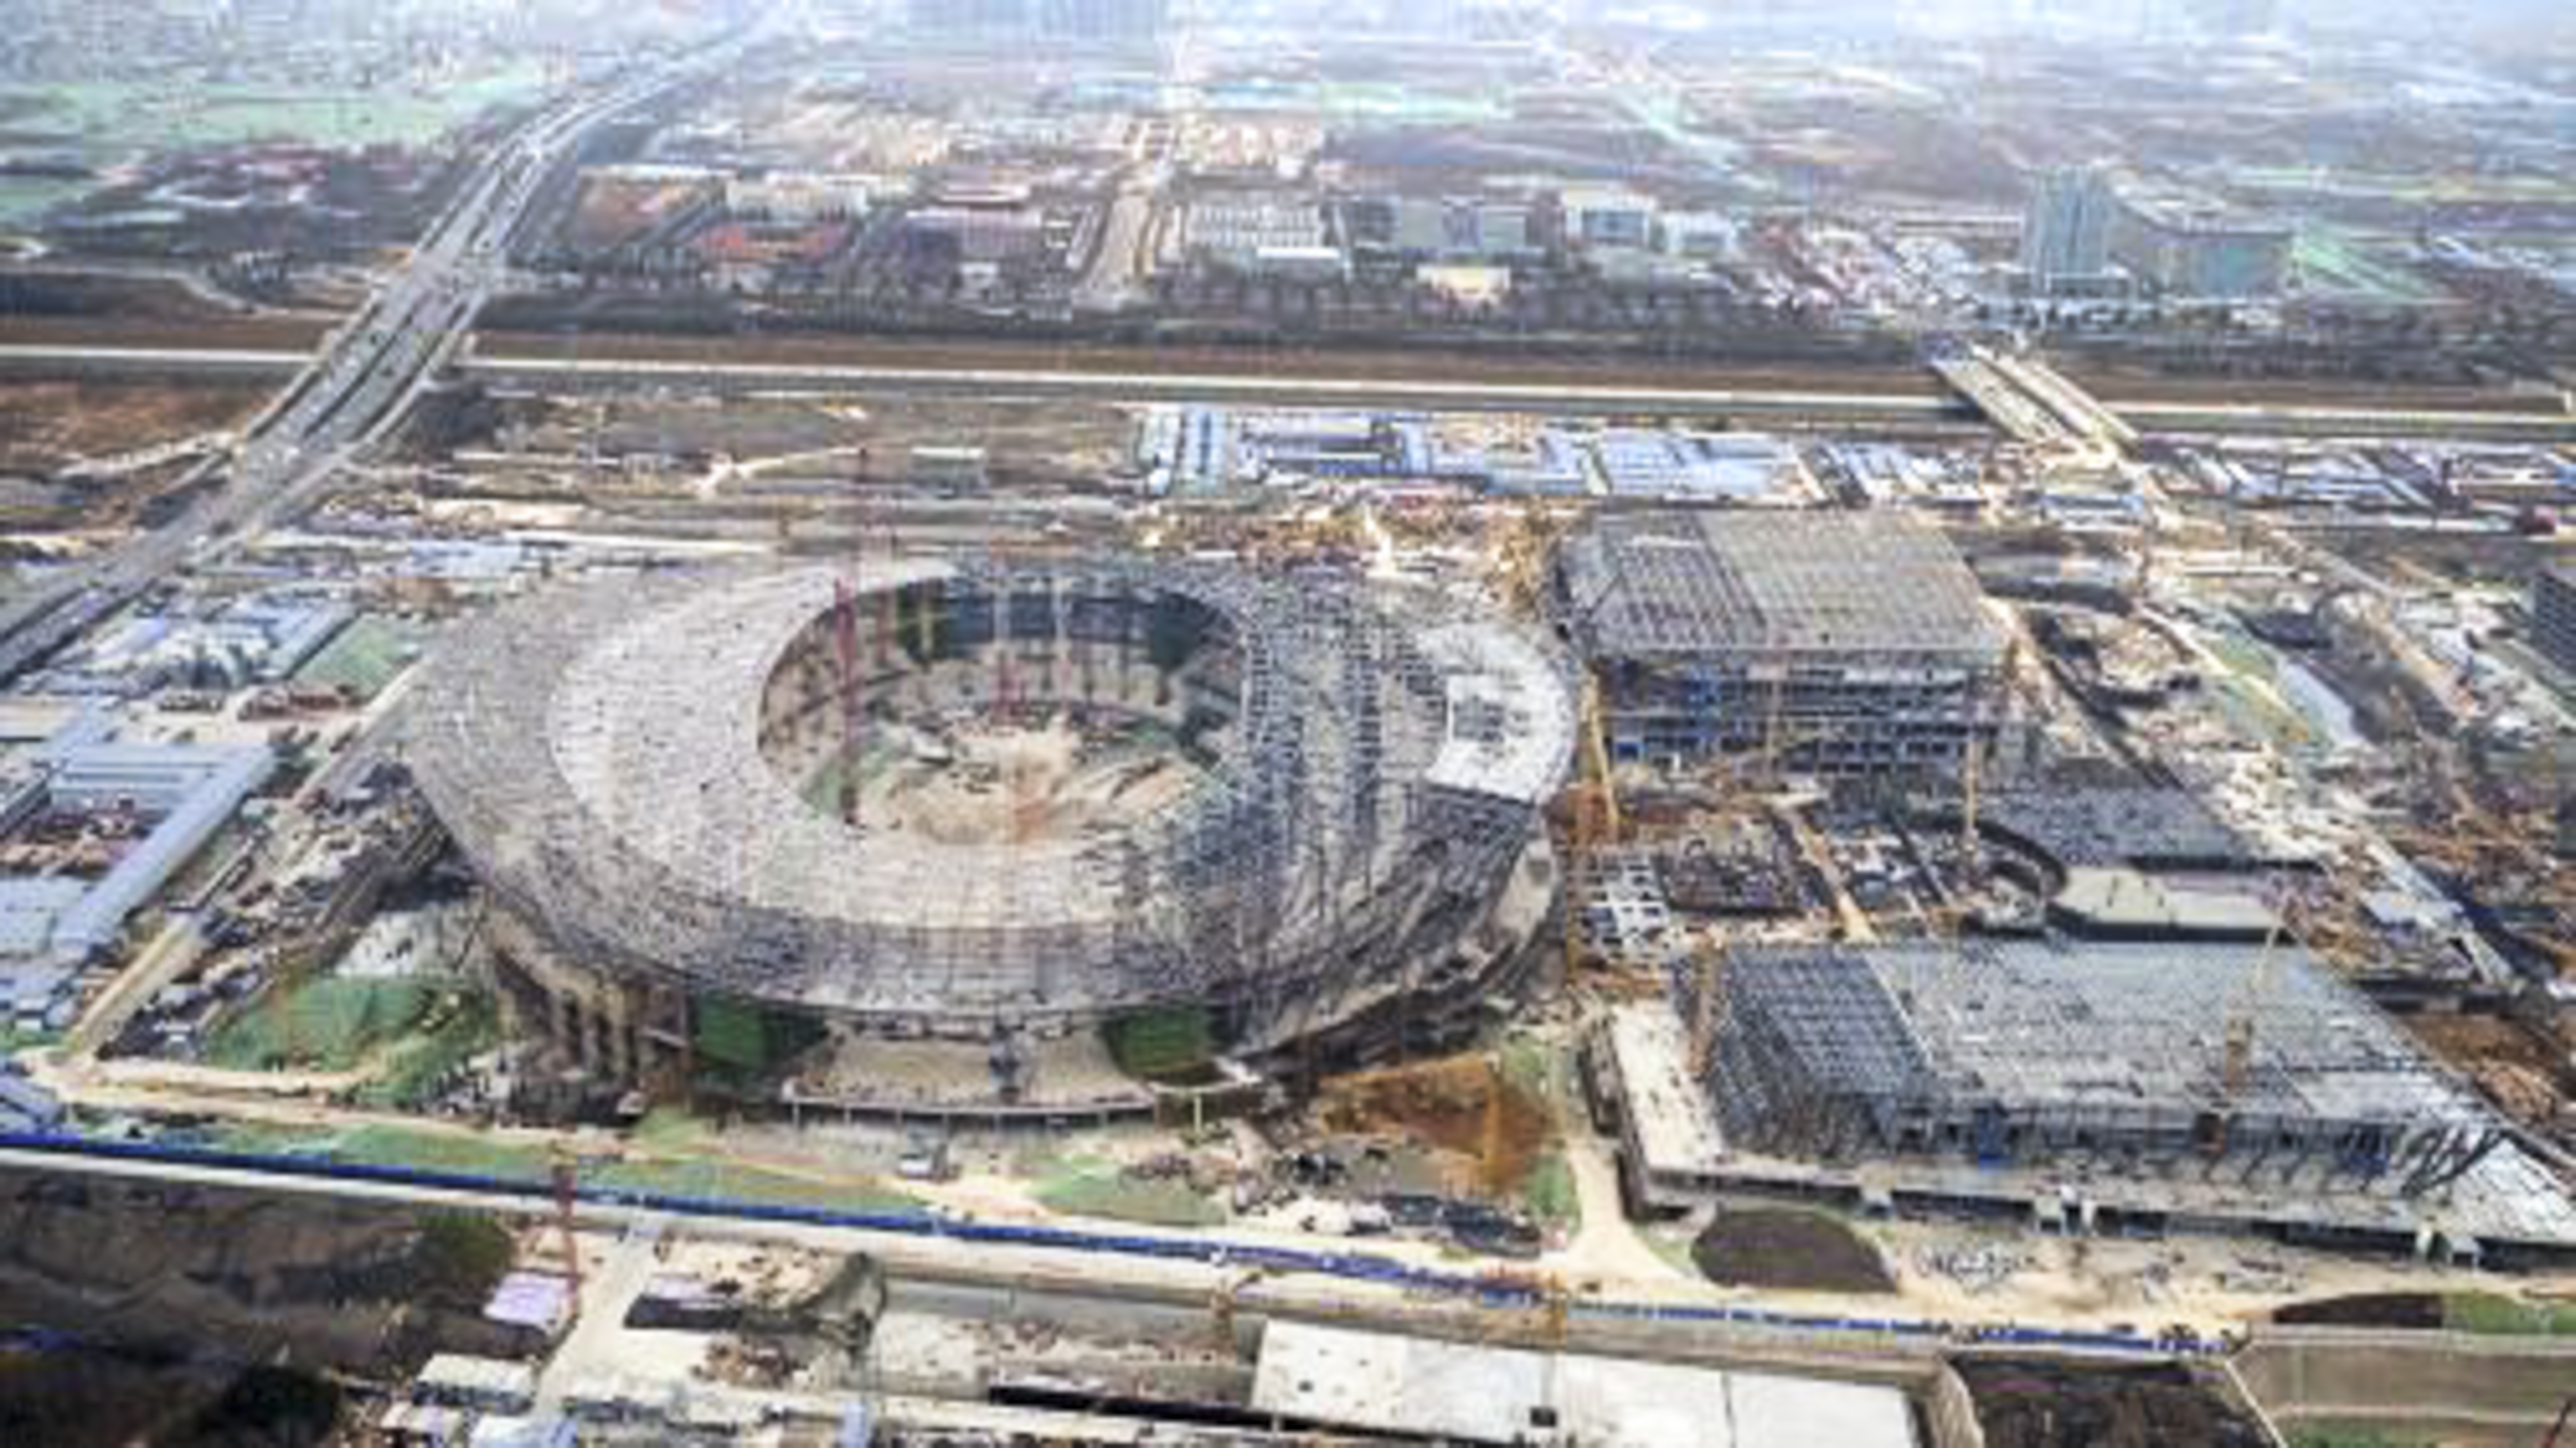 The main stadium of the Olympic Sports Centre in Zhengzhou is taking shape – and it looks a little like the “Bird’s Nest”. Photo: Sina.com